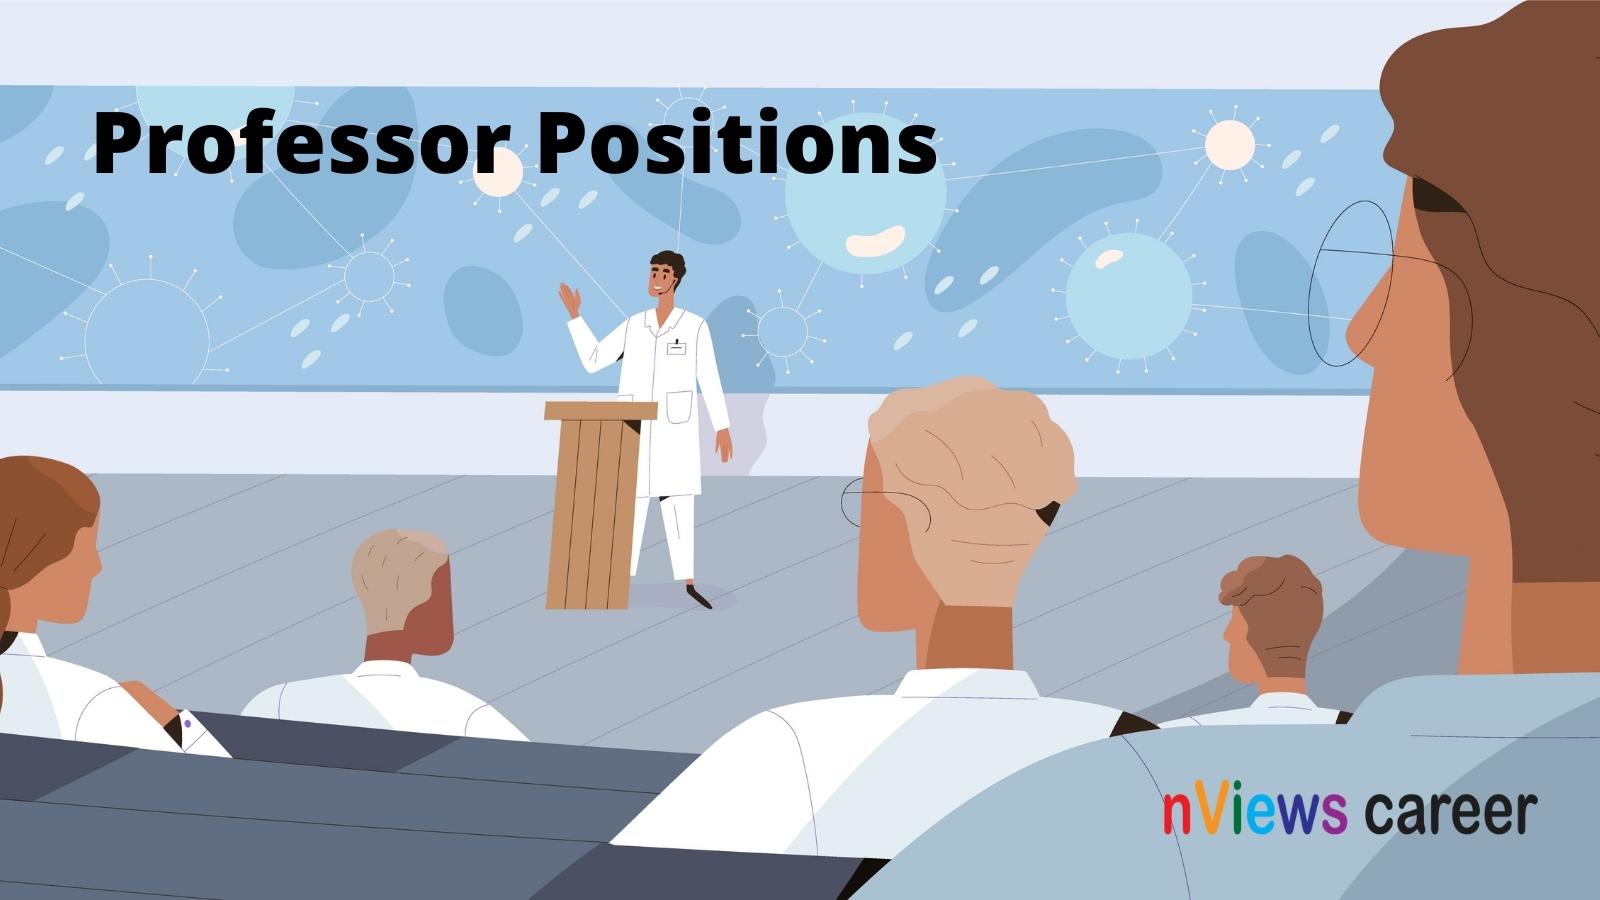 Professor Positions Jobs Animation Of Lecture Given By Person In The Auditorium